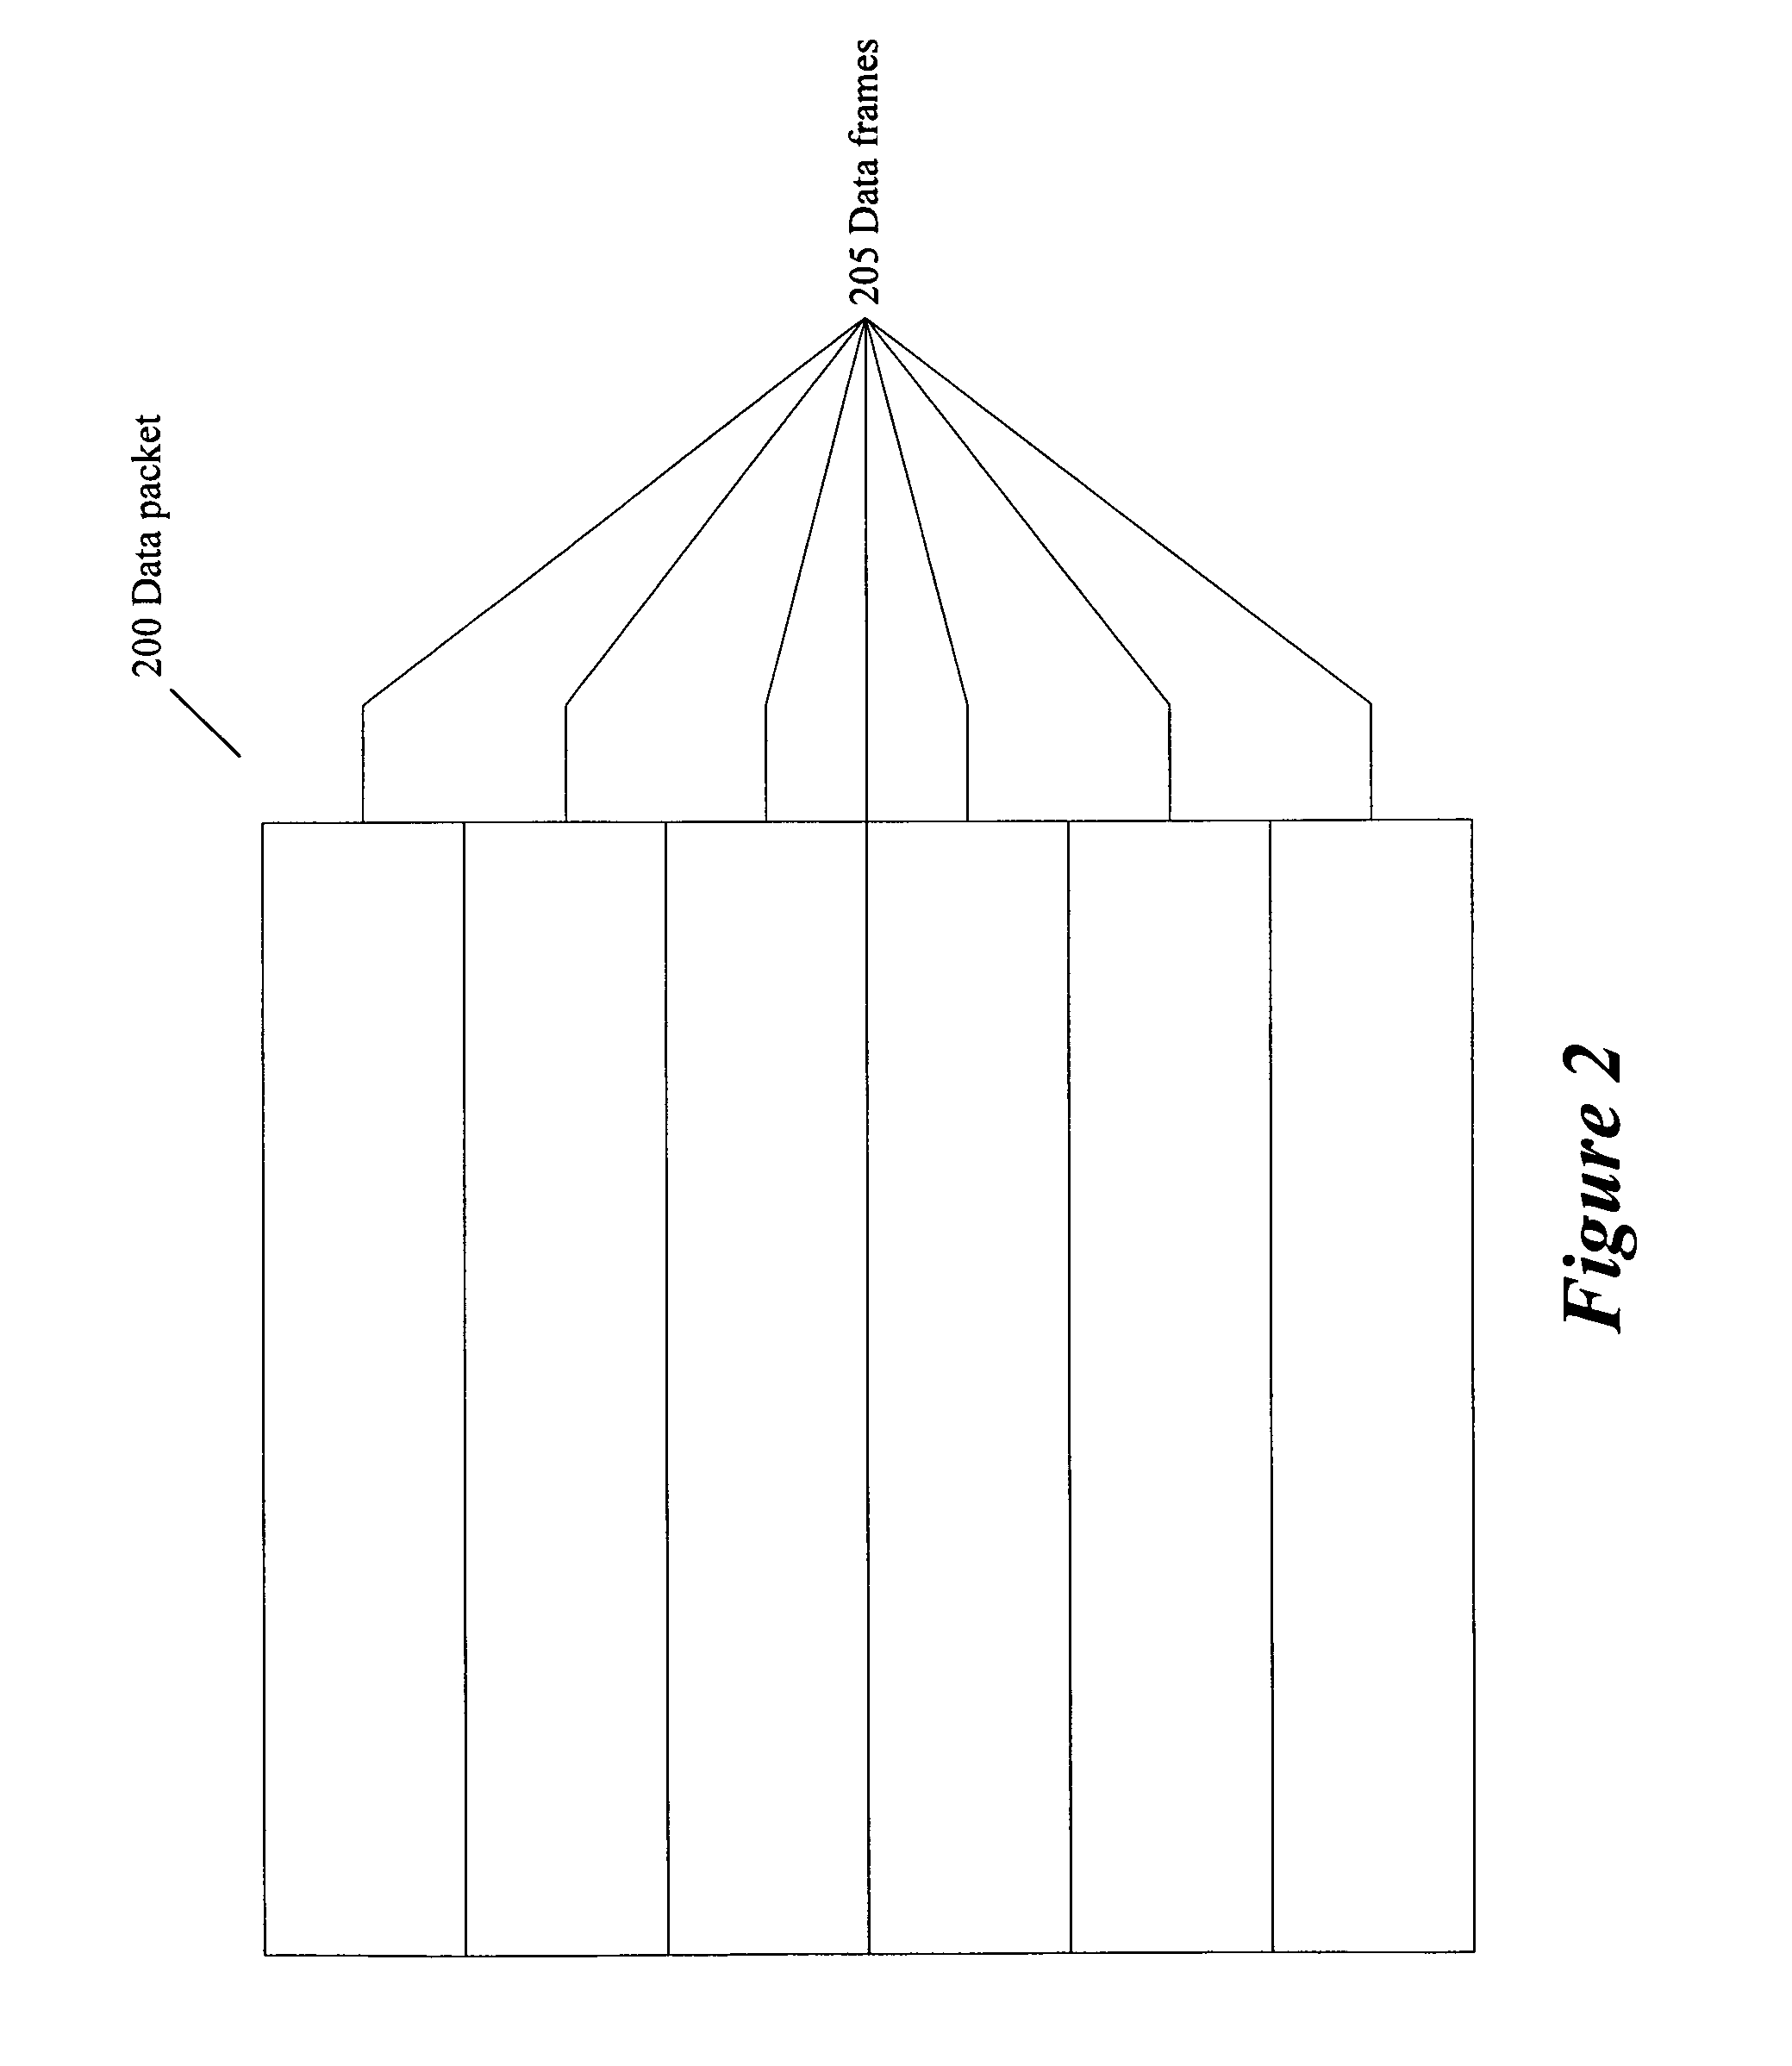 Restructuring data from a trace buffer of a configurable IC